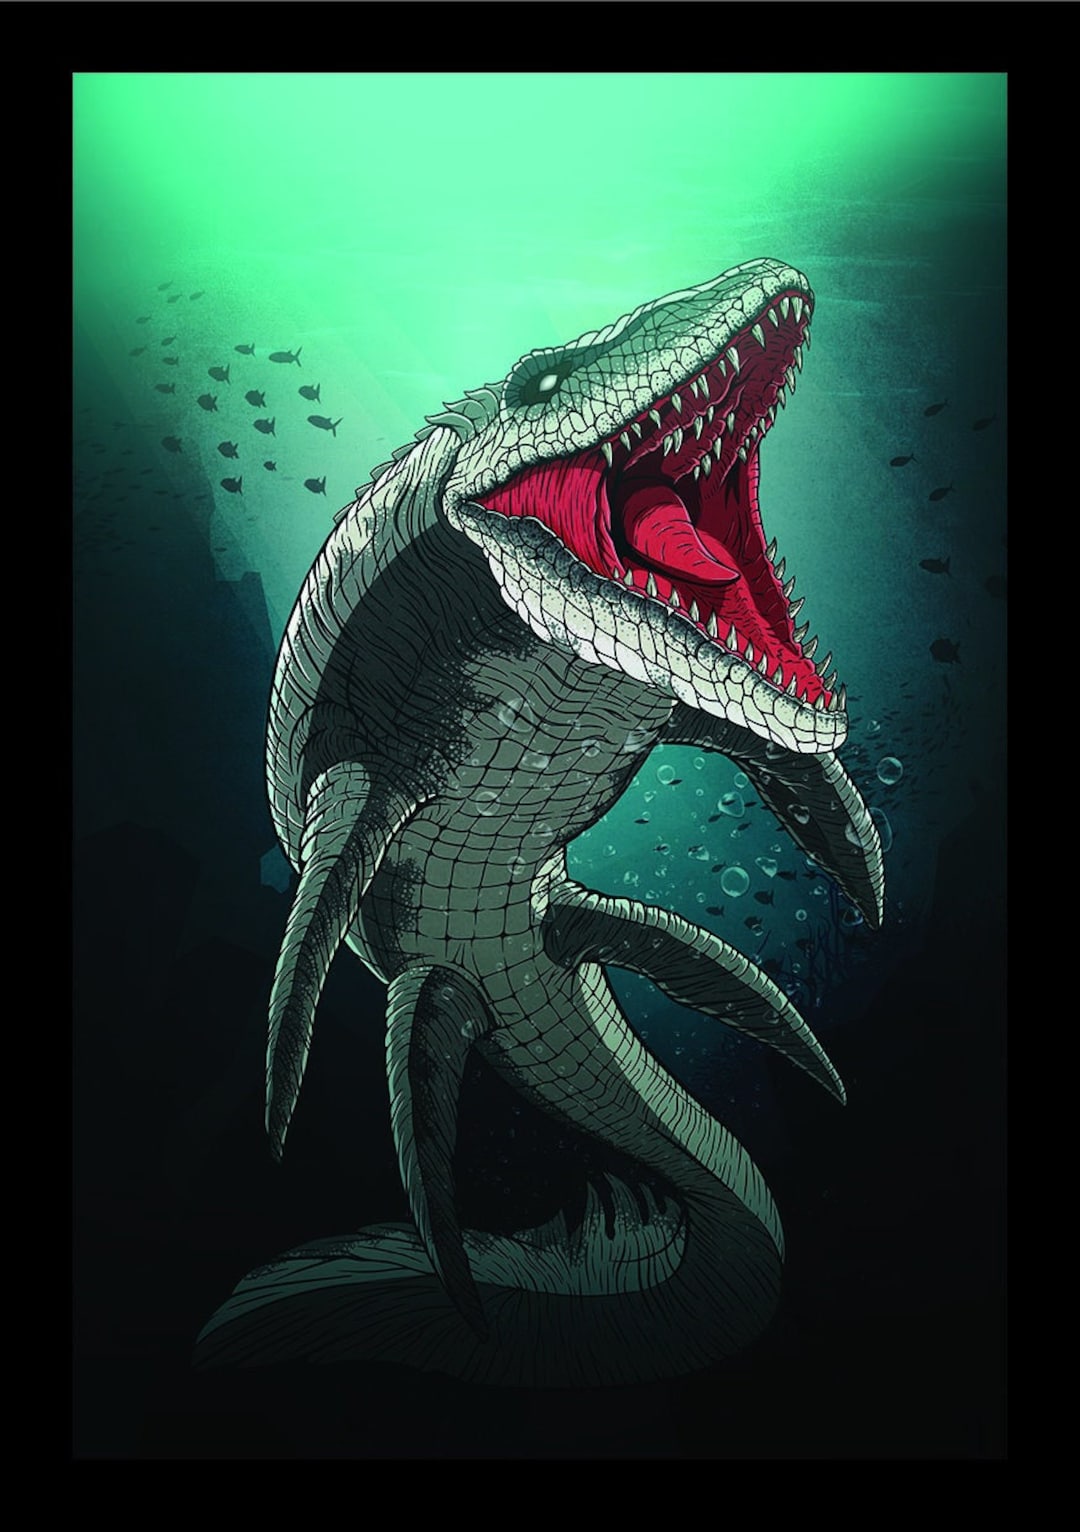 Giant Mosasaurus Features in Jurassic World Poster